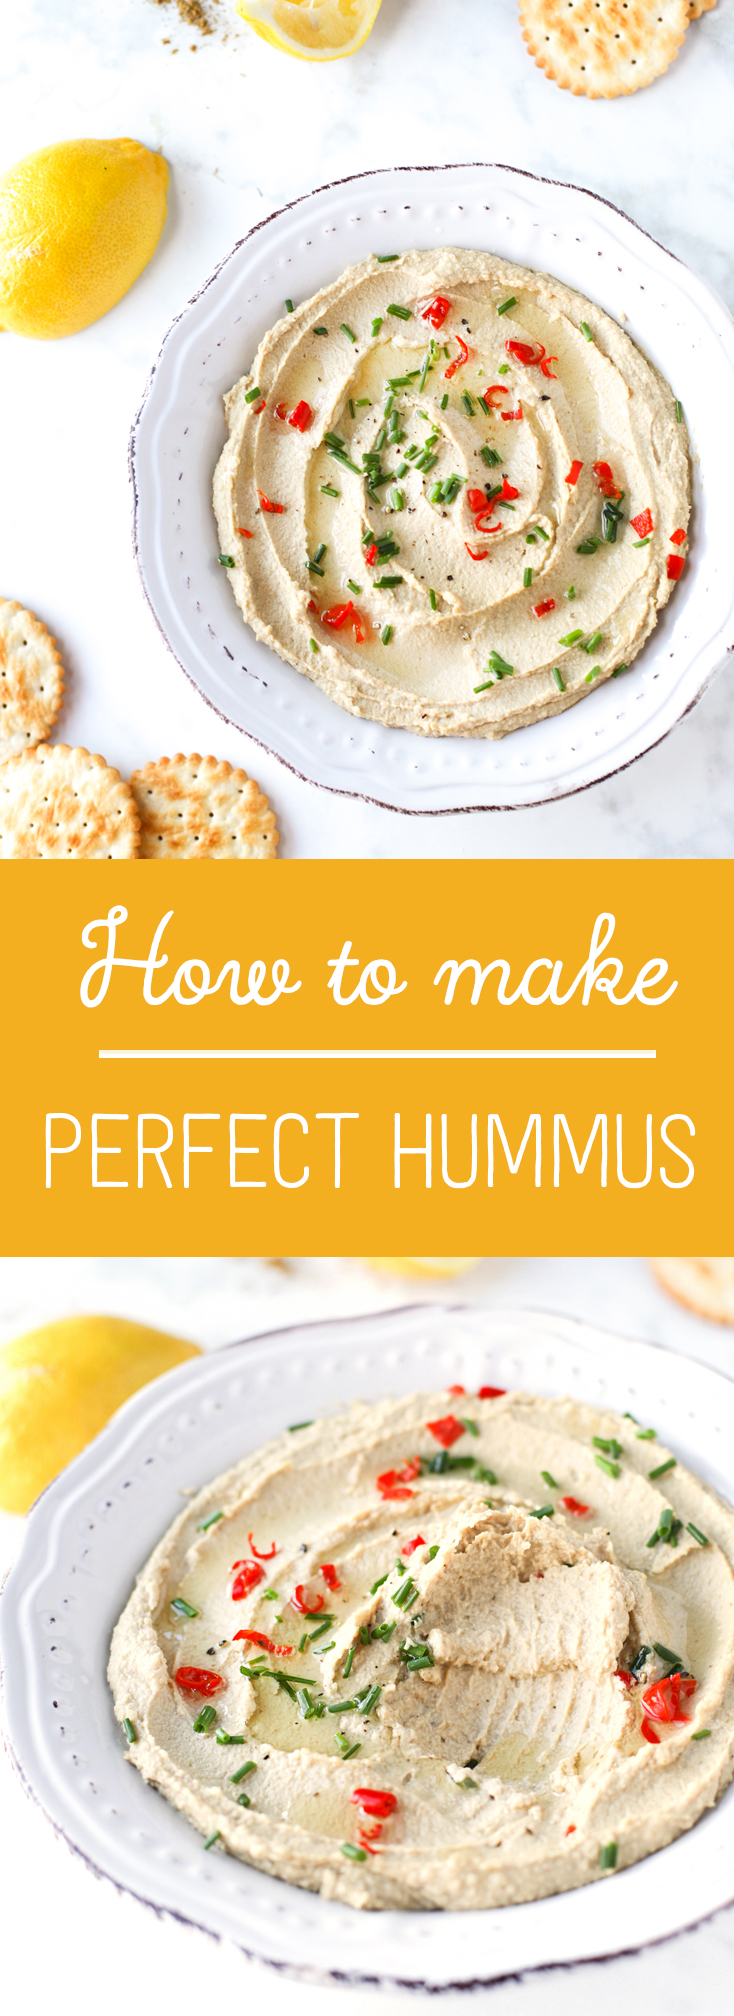 Hummus sprinkled with herbs and chilli served with crackers